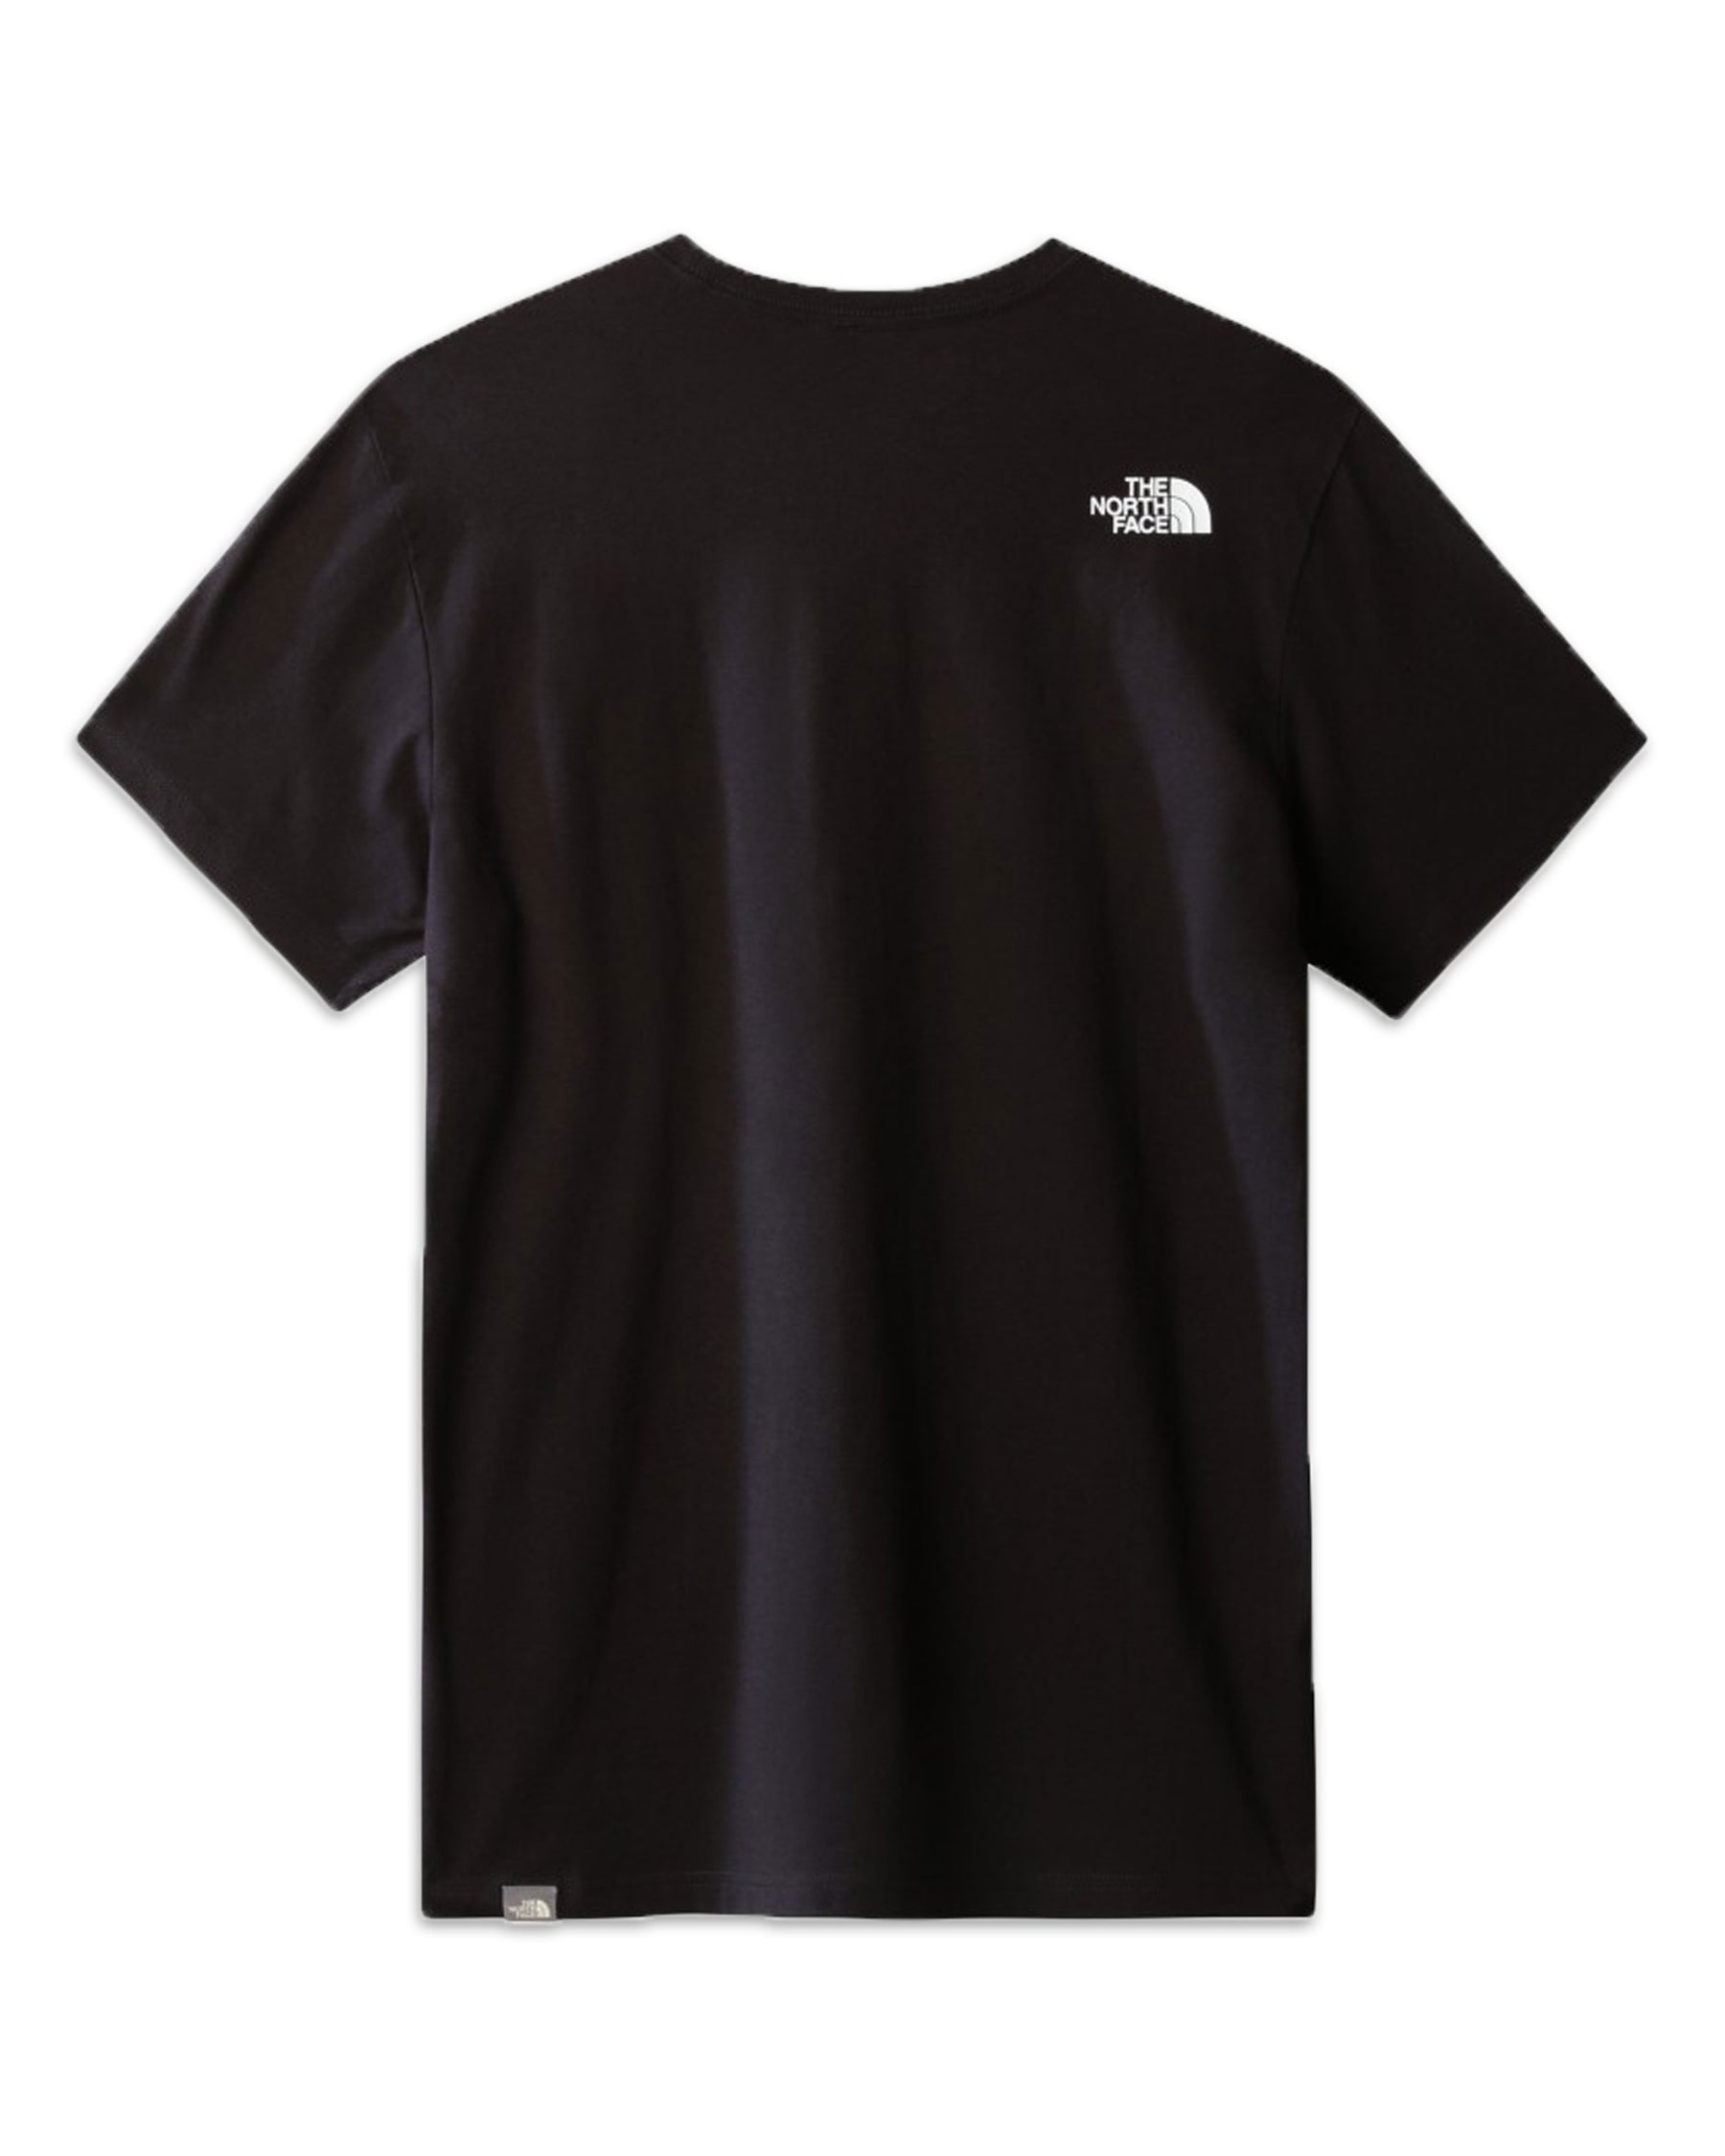 Man Tee The North Face Never Stop Exploring Black